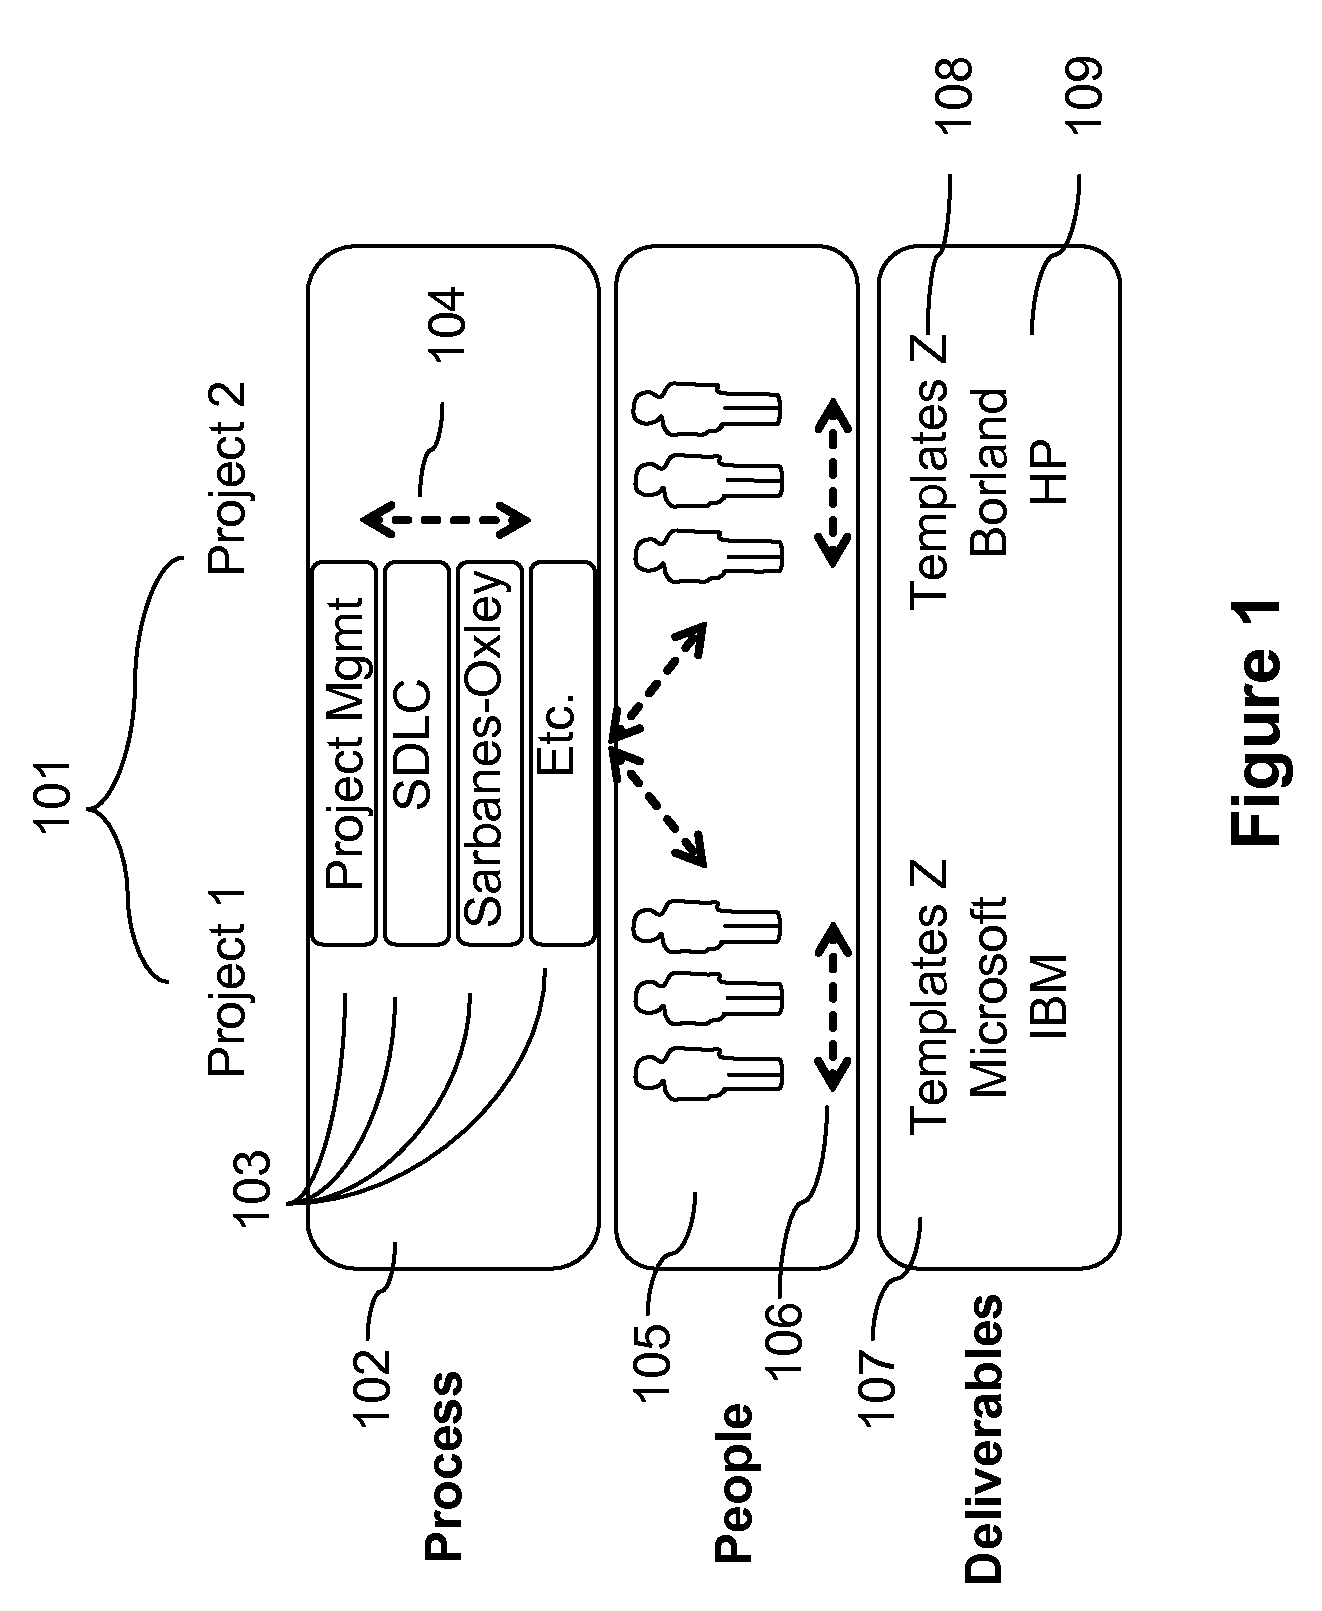 System and Method of Facilitating Project Management with User Interface